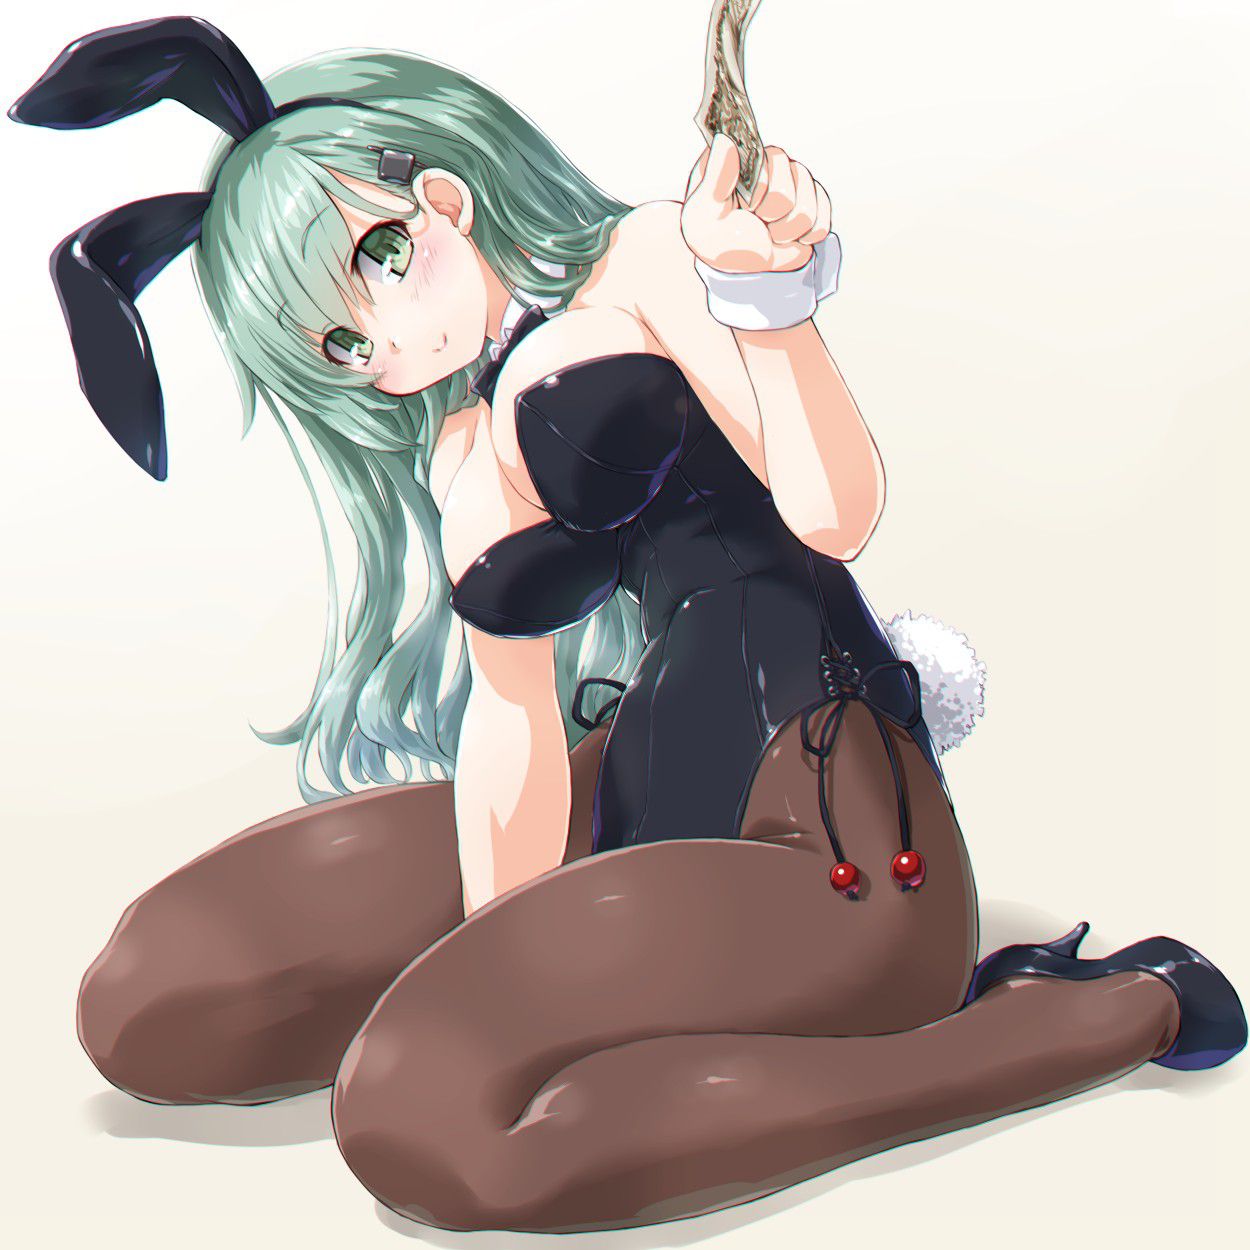 【Secondary Erotic】 Here is an erotic image of a girl dressed in a bunny girl costume that stands out for the eroticism of buttocks and 26